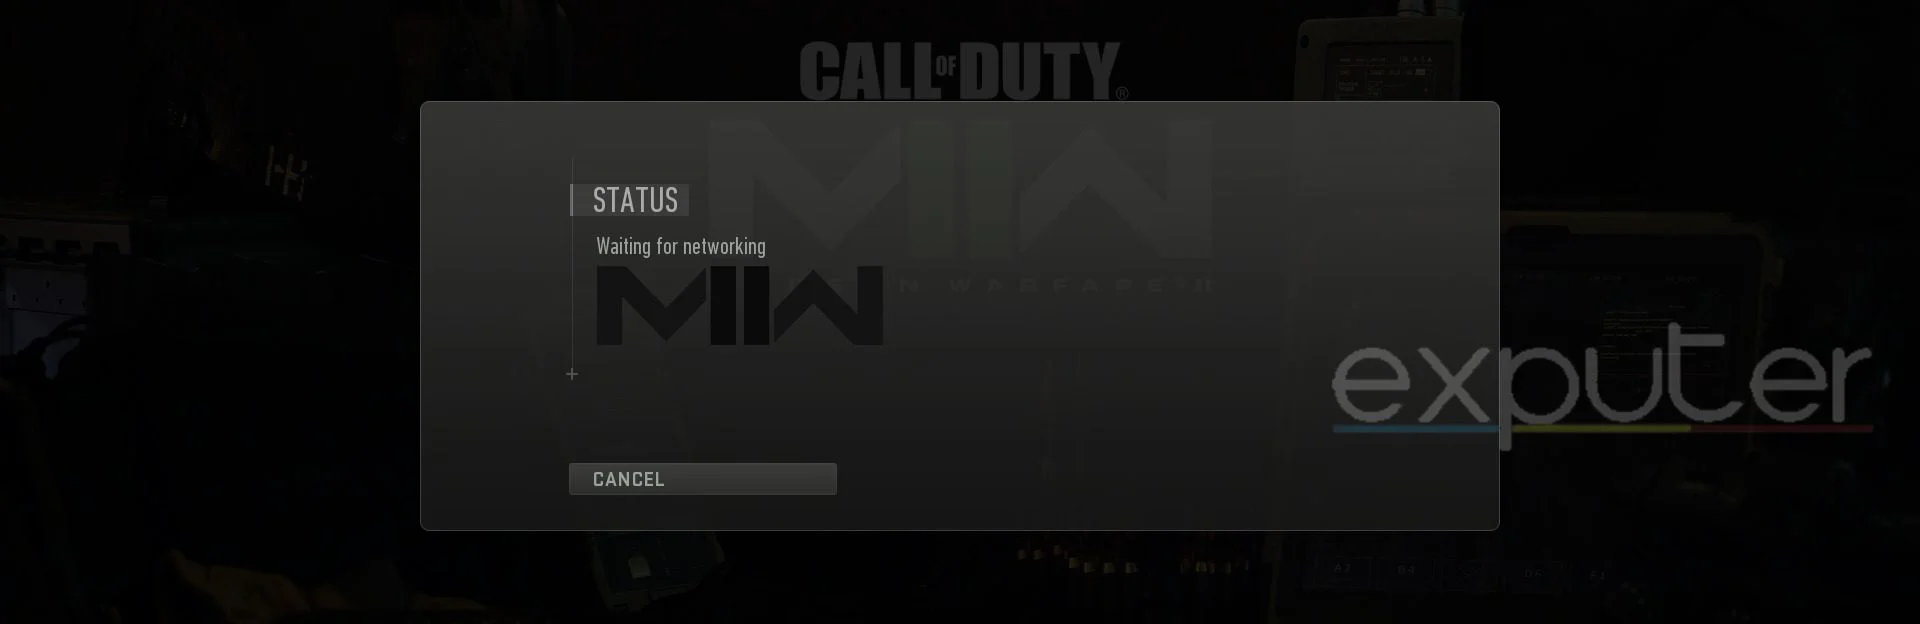 Modern Warfare 2 “Disconnected from Steam” error: How to fix, possible  reasons, and more